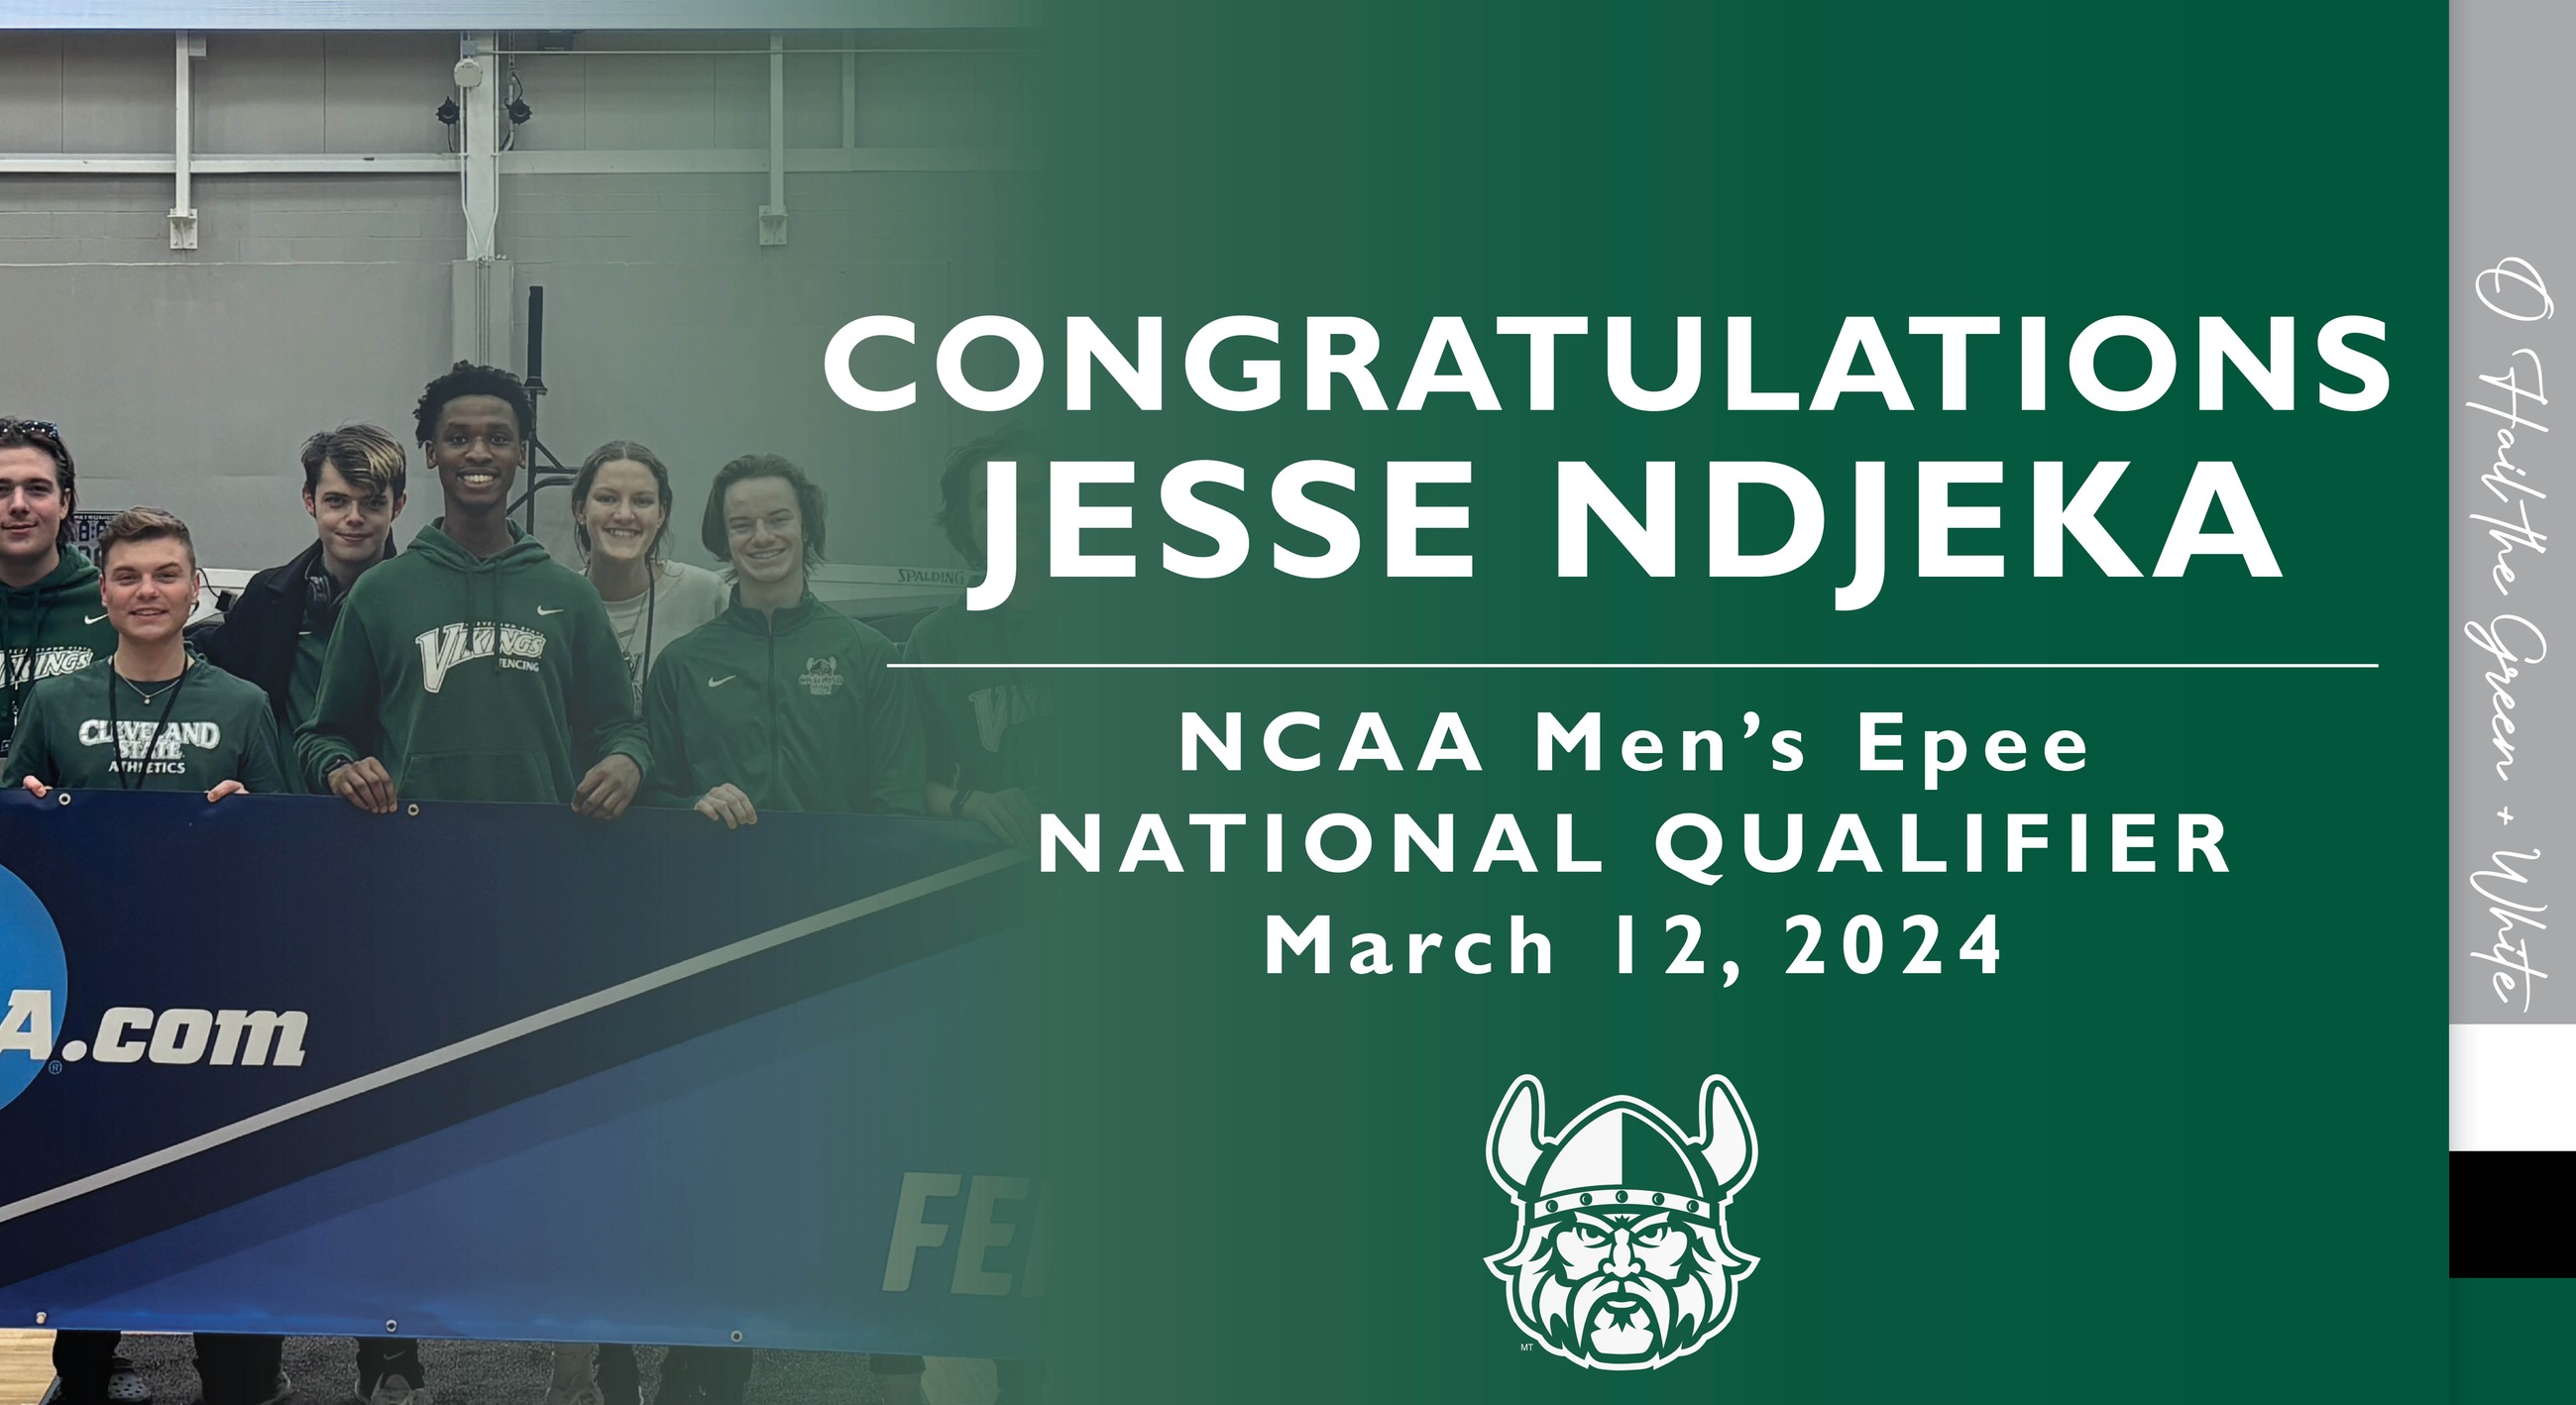 Jesse Ndjeka Qualifies for NCAA Fencing National Championship in Men’s Epee